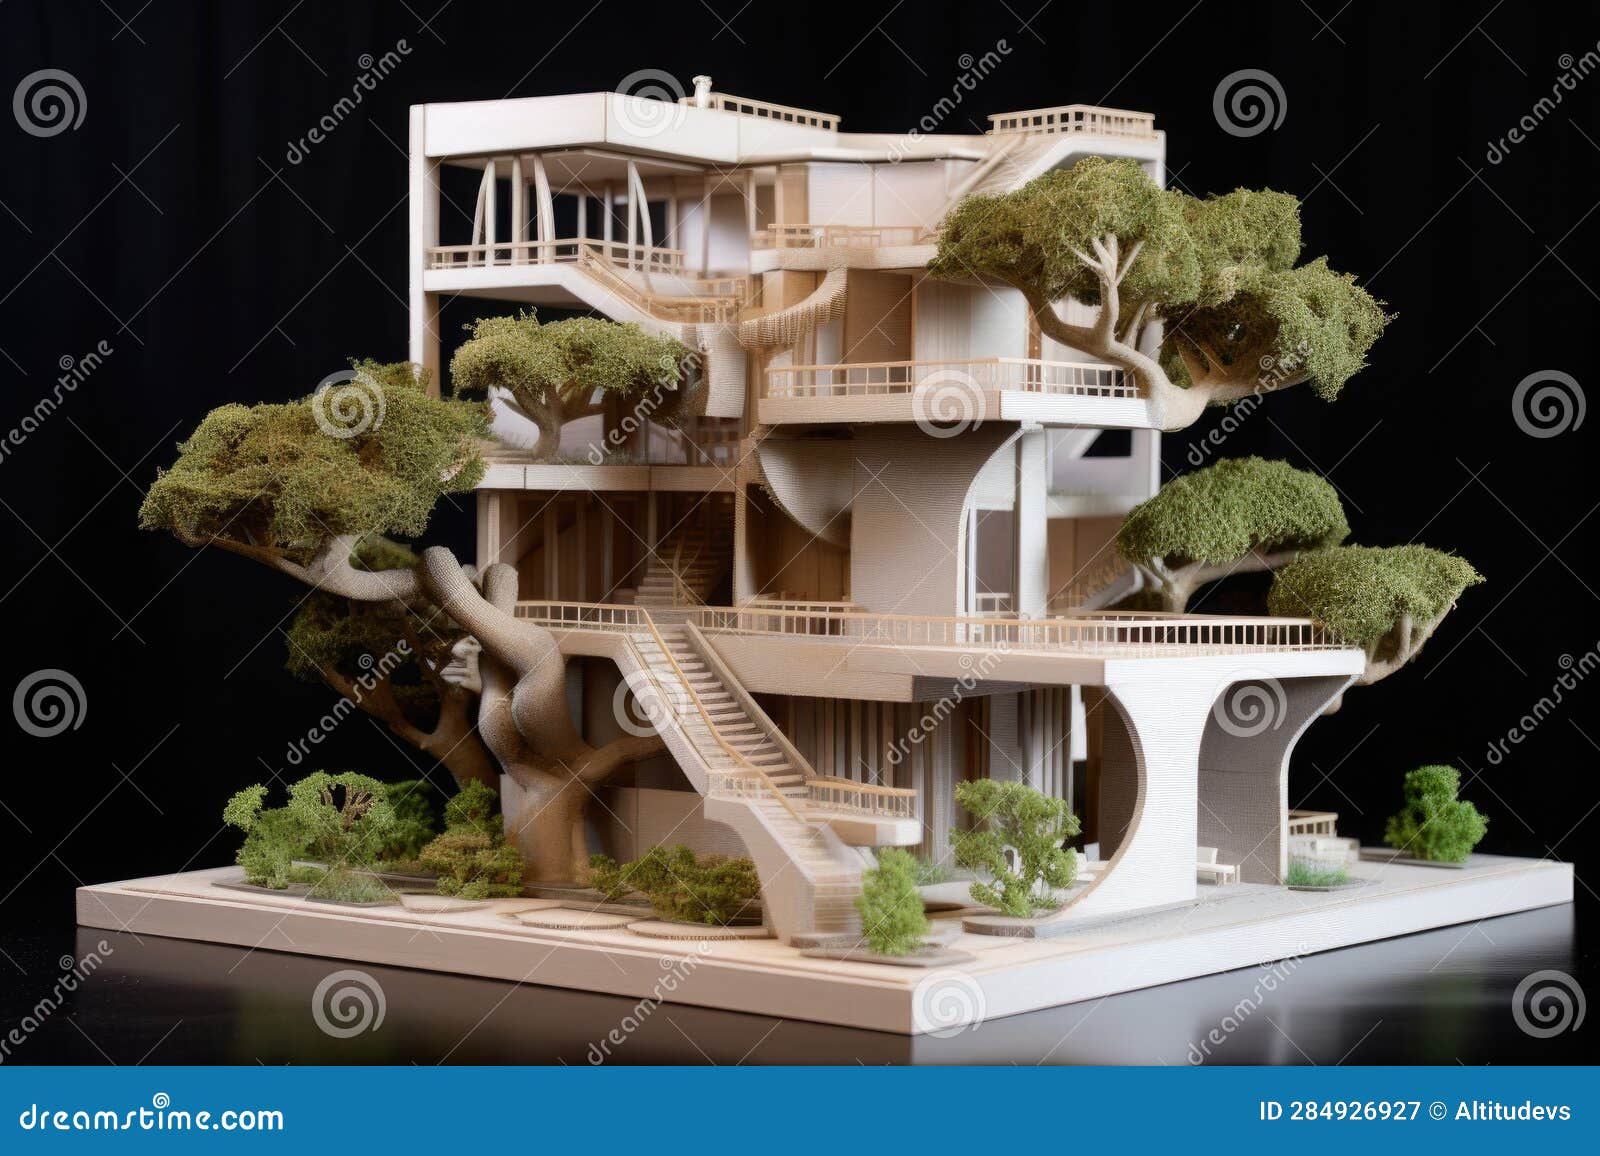 4d printed eco-friendly architecture model